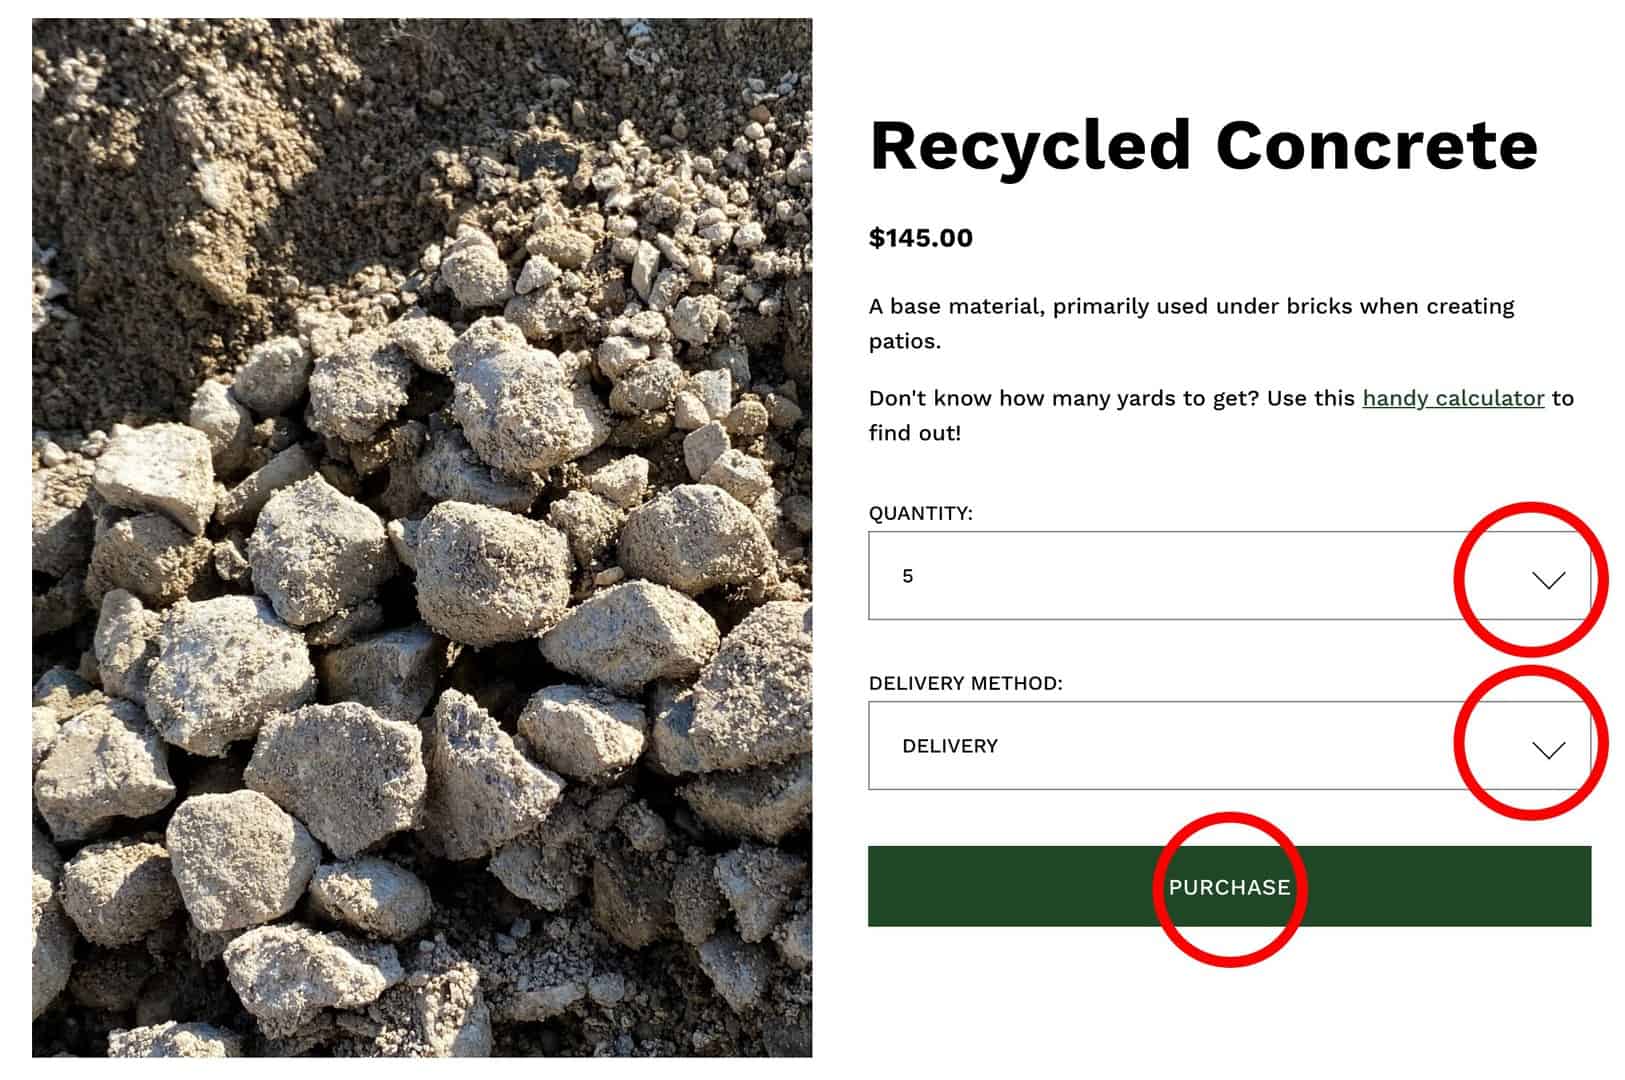 The product listing for recycled concrete